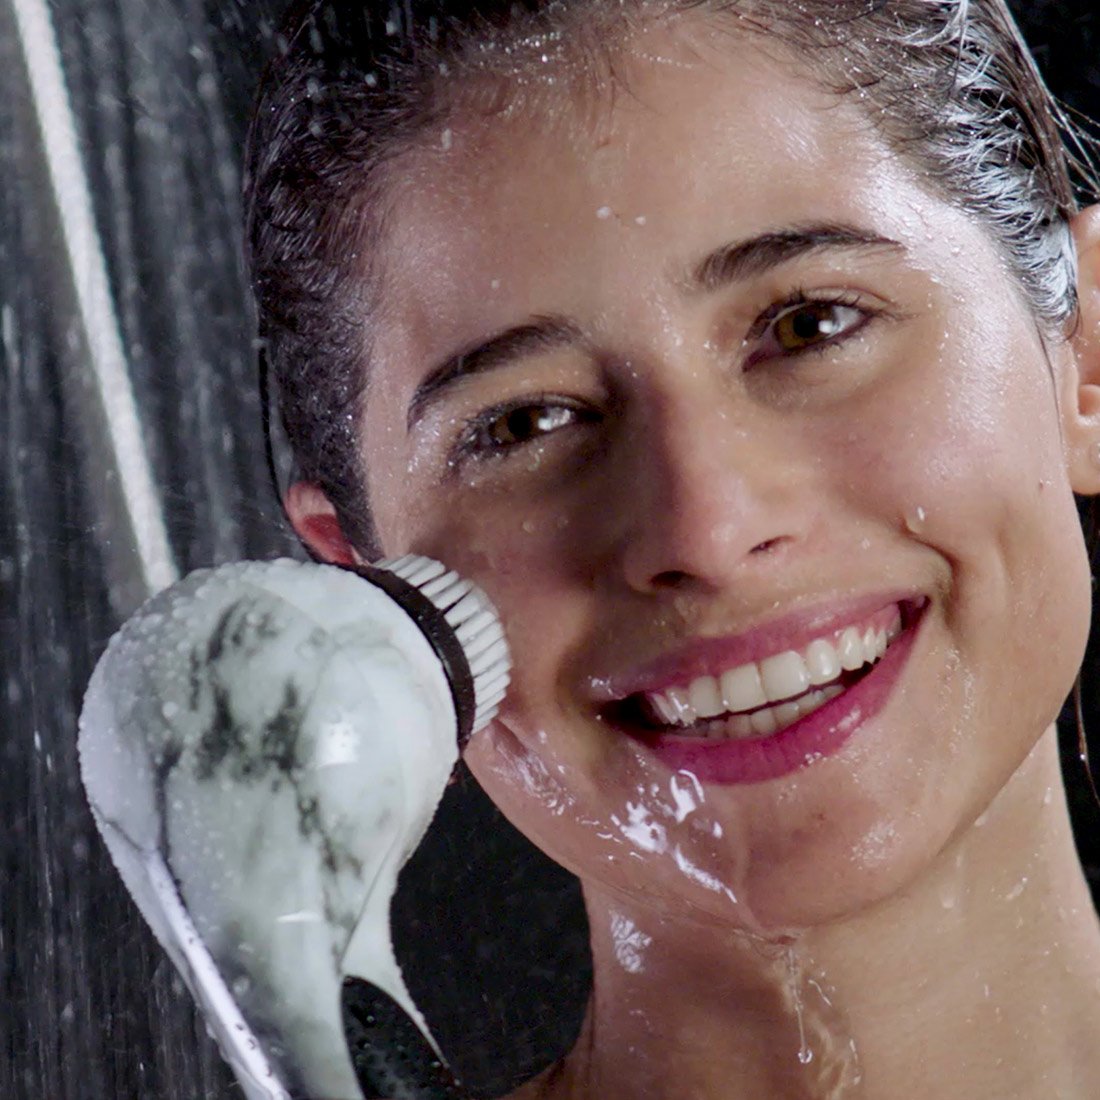 A woman with a flawless look smiling in the shower, showcasing her clean complexion using the Stay Balanced by Michael Todd Beauty.